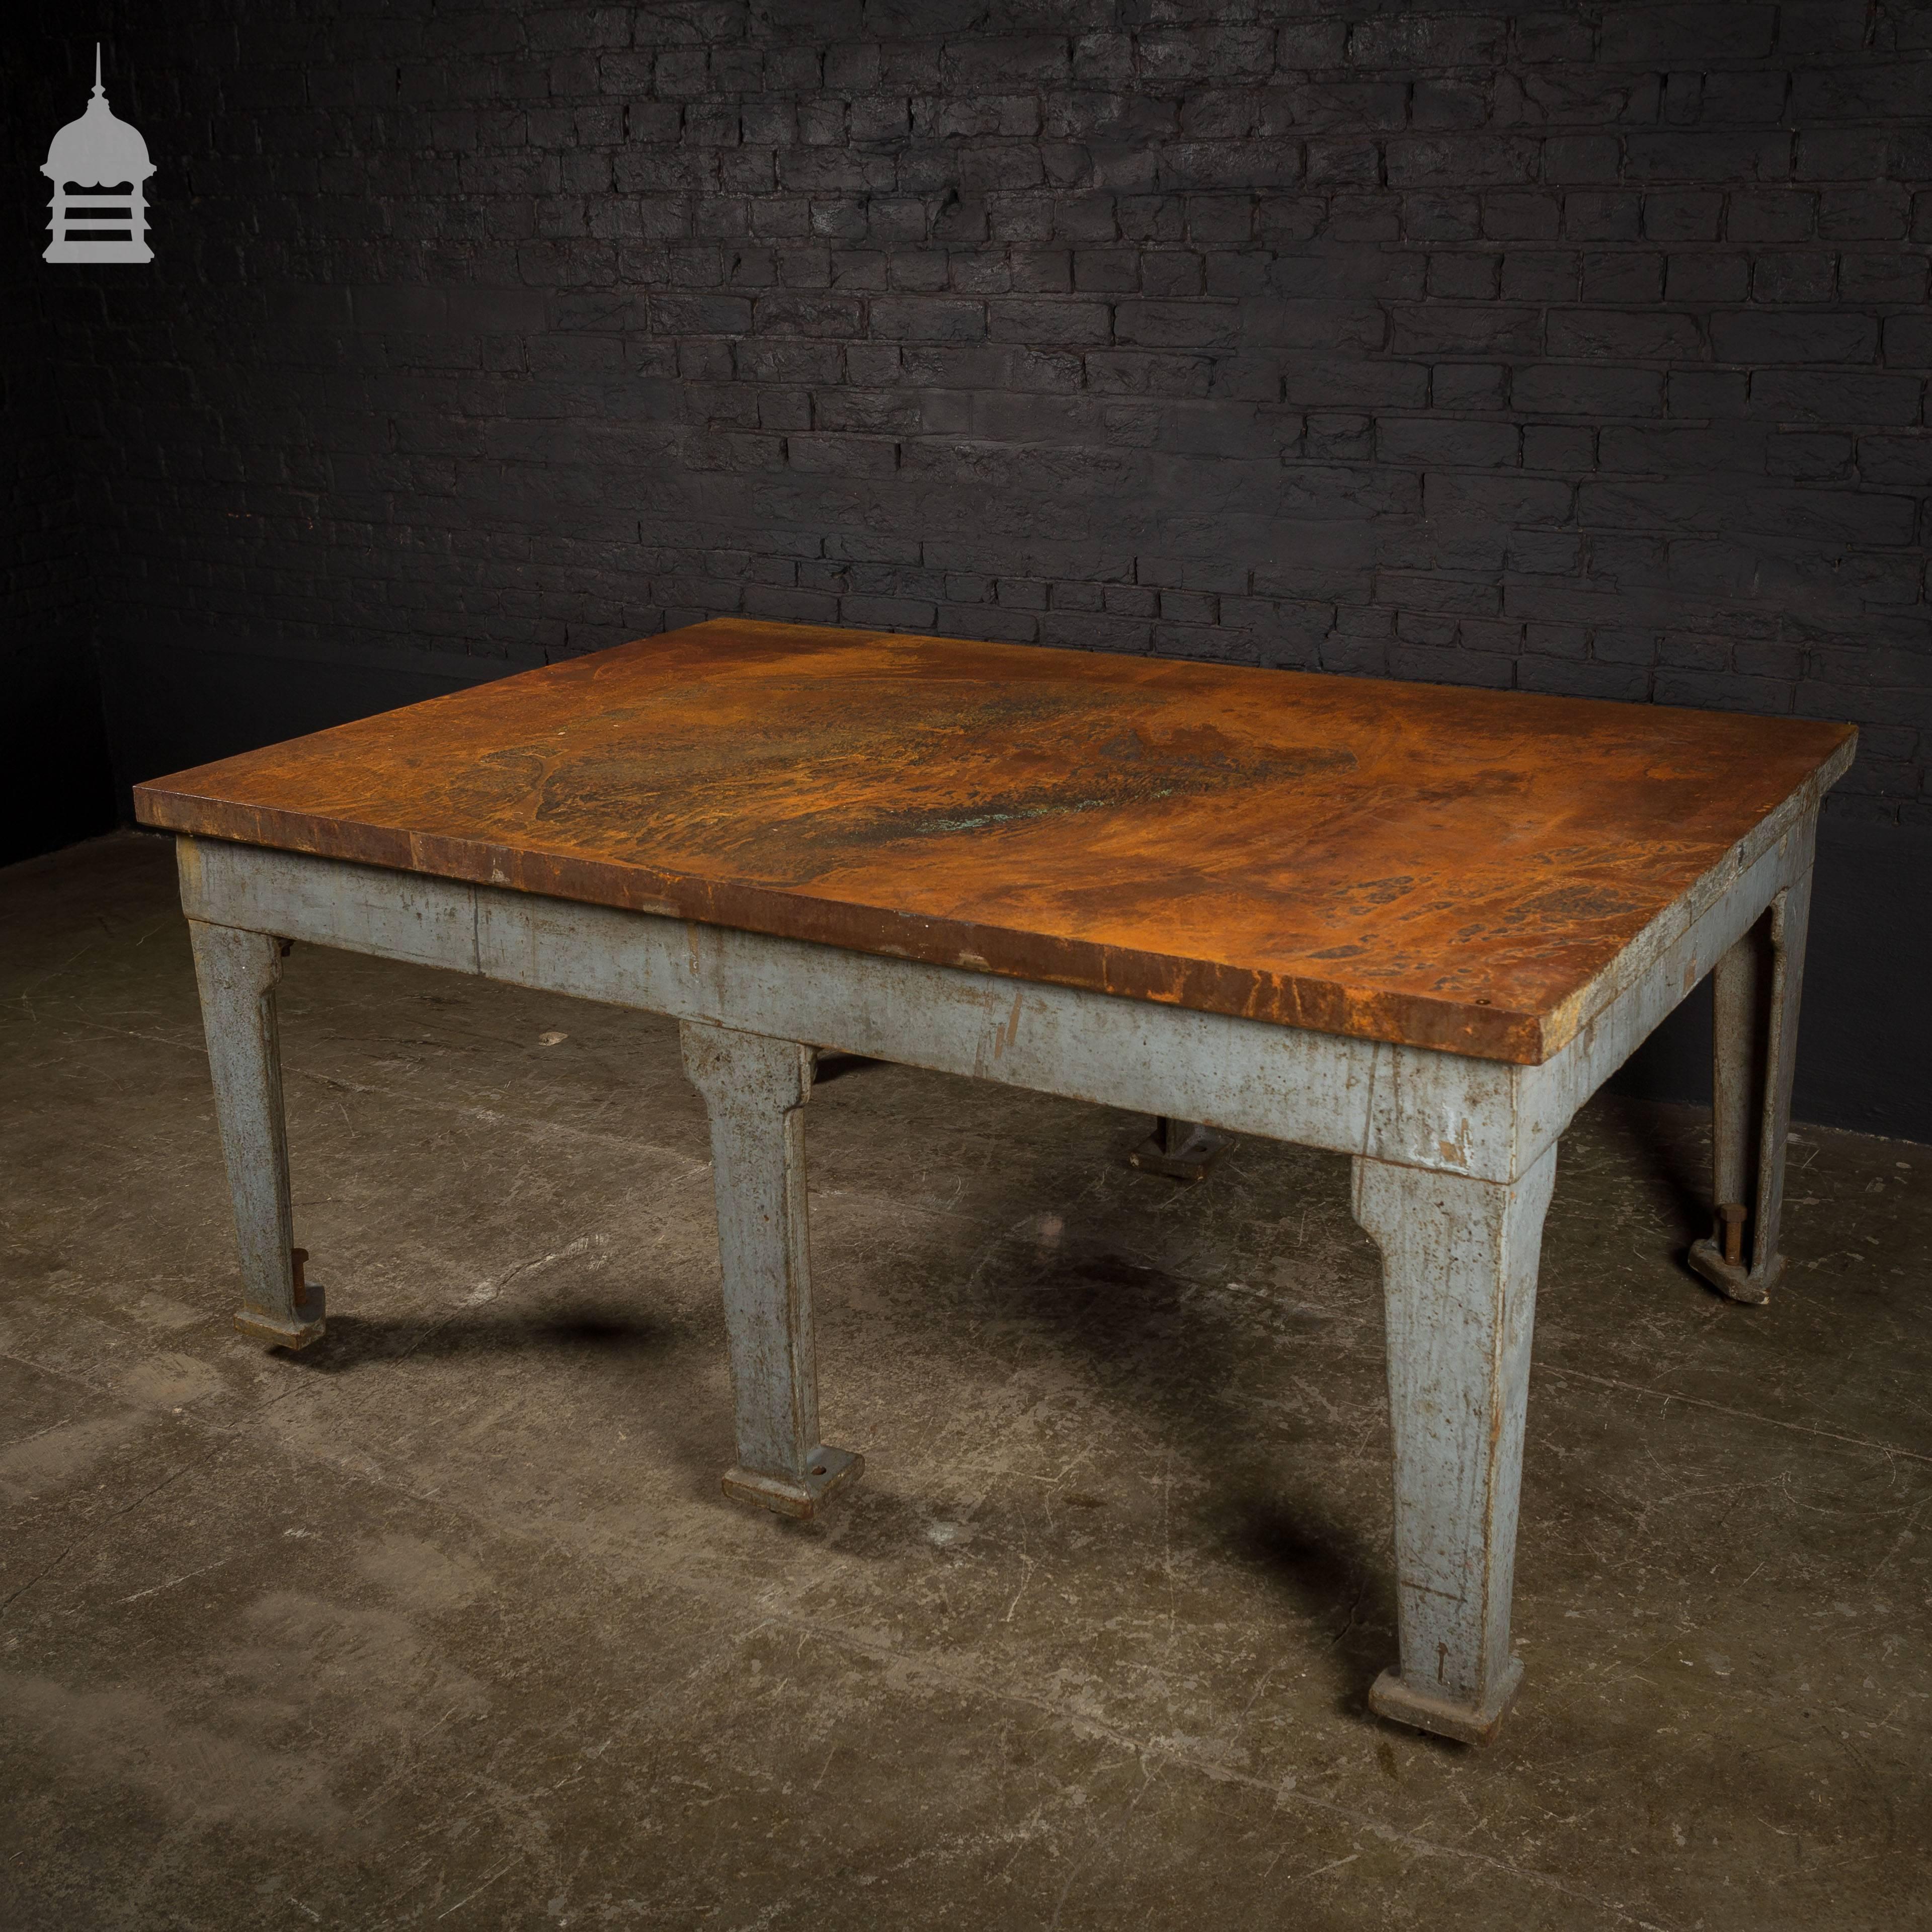 Industrial cast iron surface table with six legs.